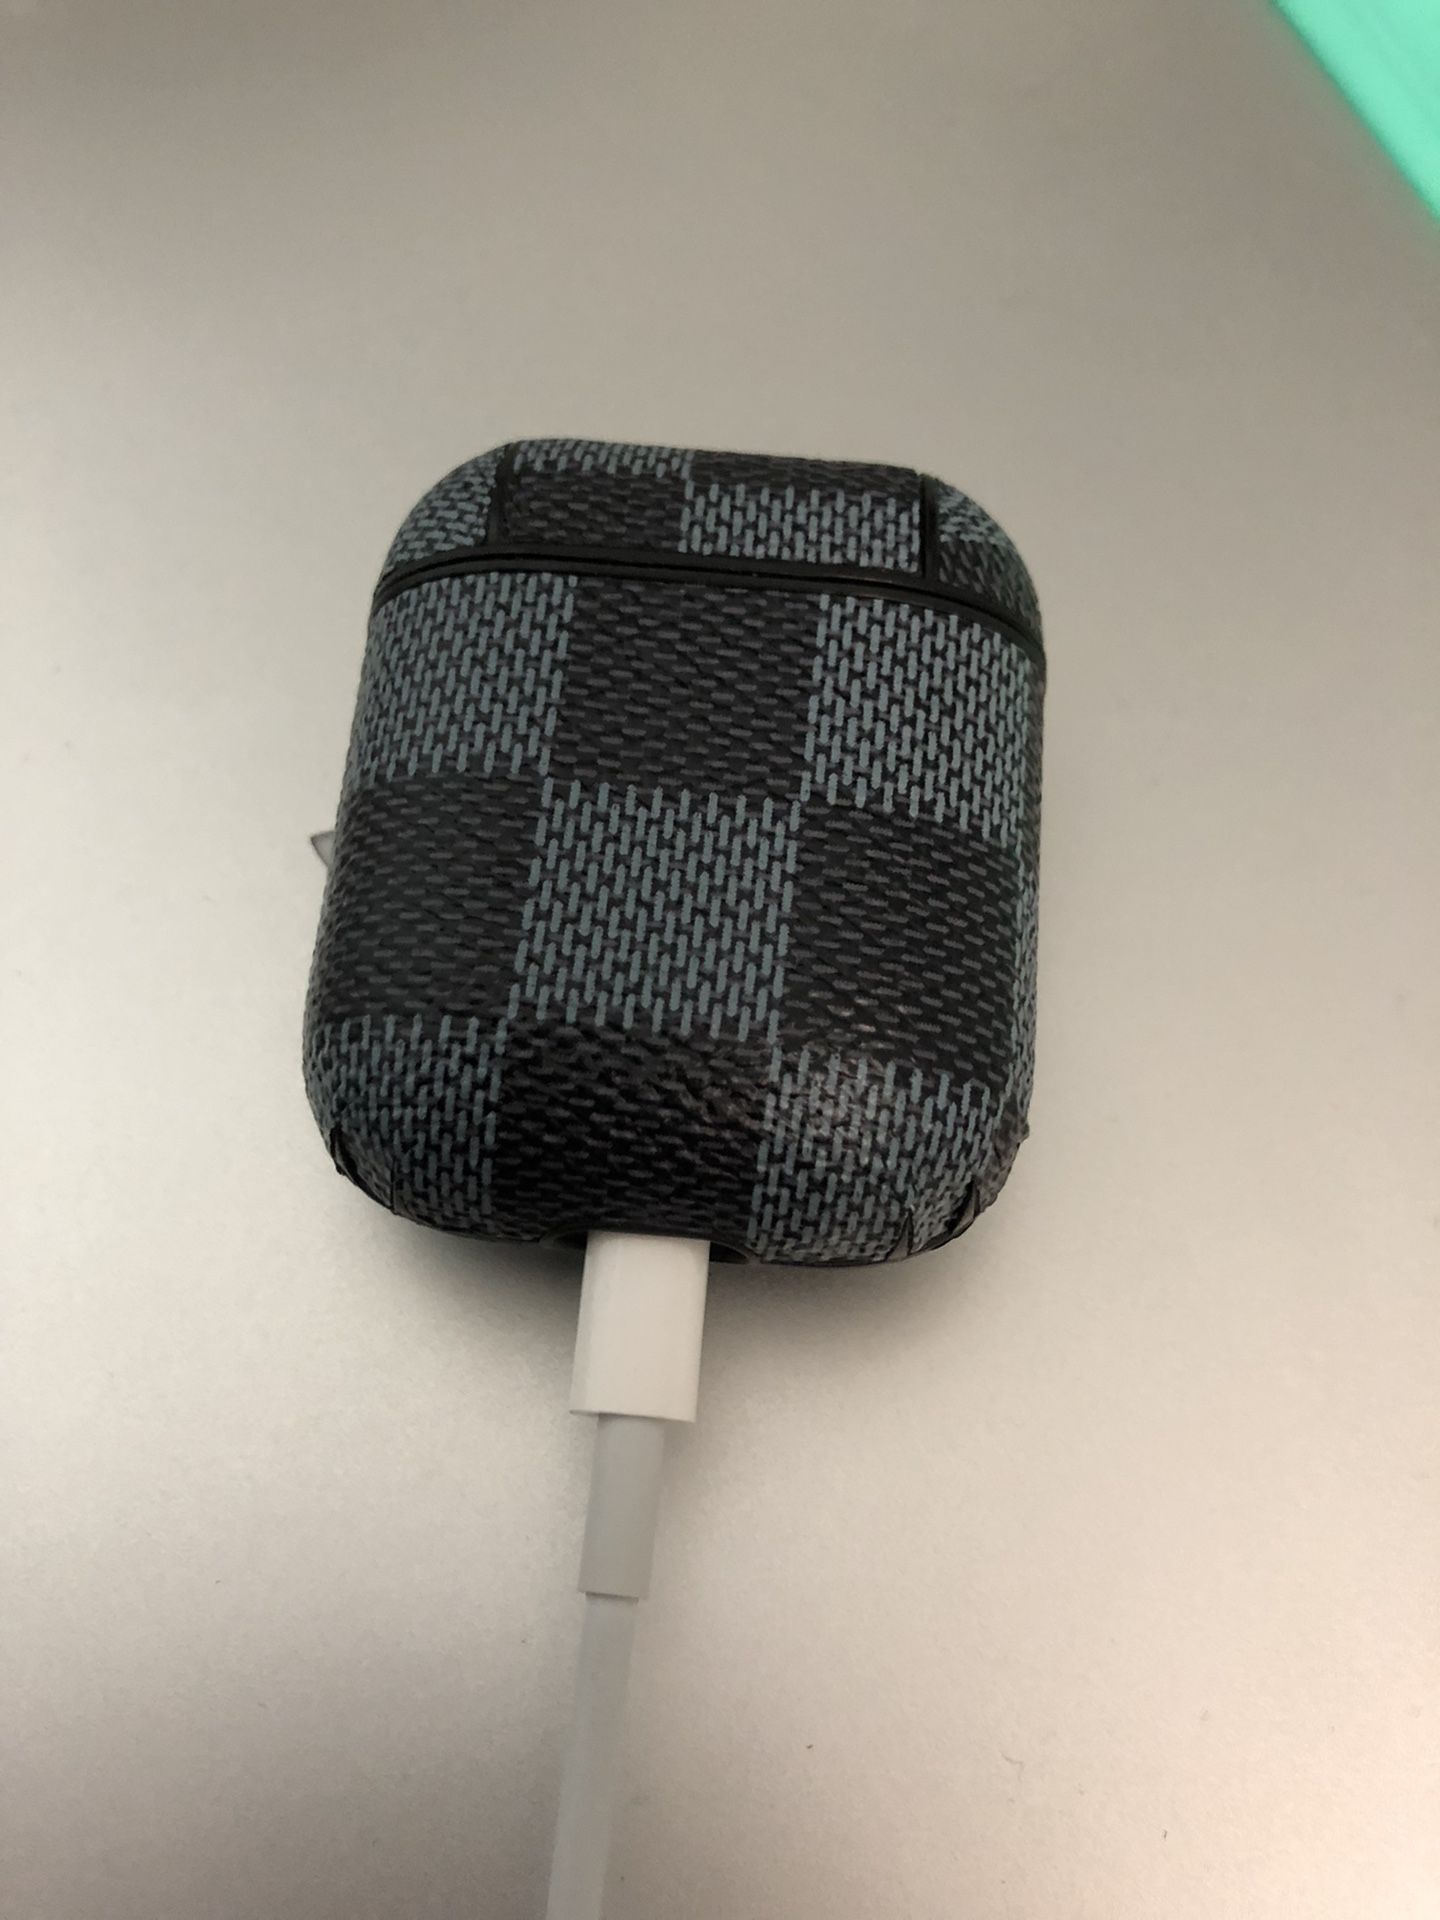 Fast shipping only. Airpods cover